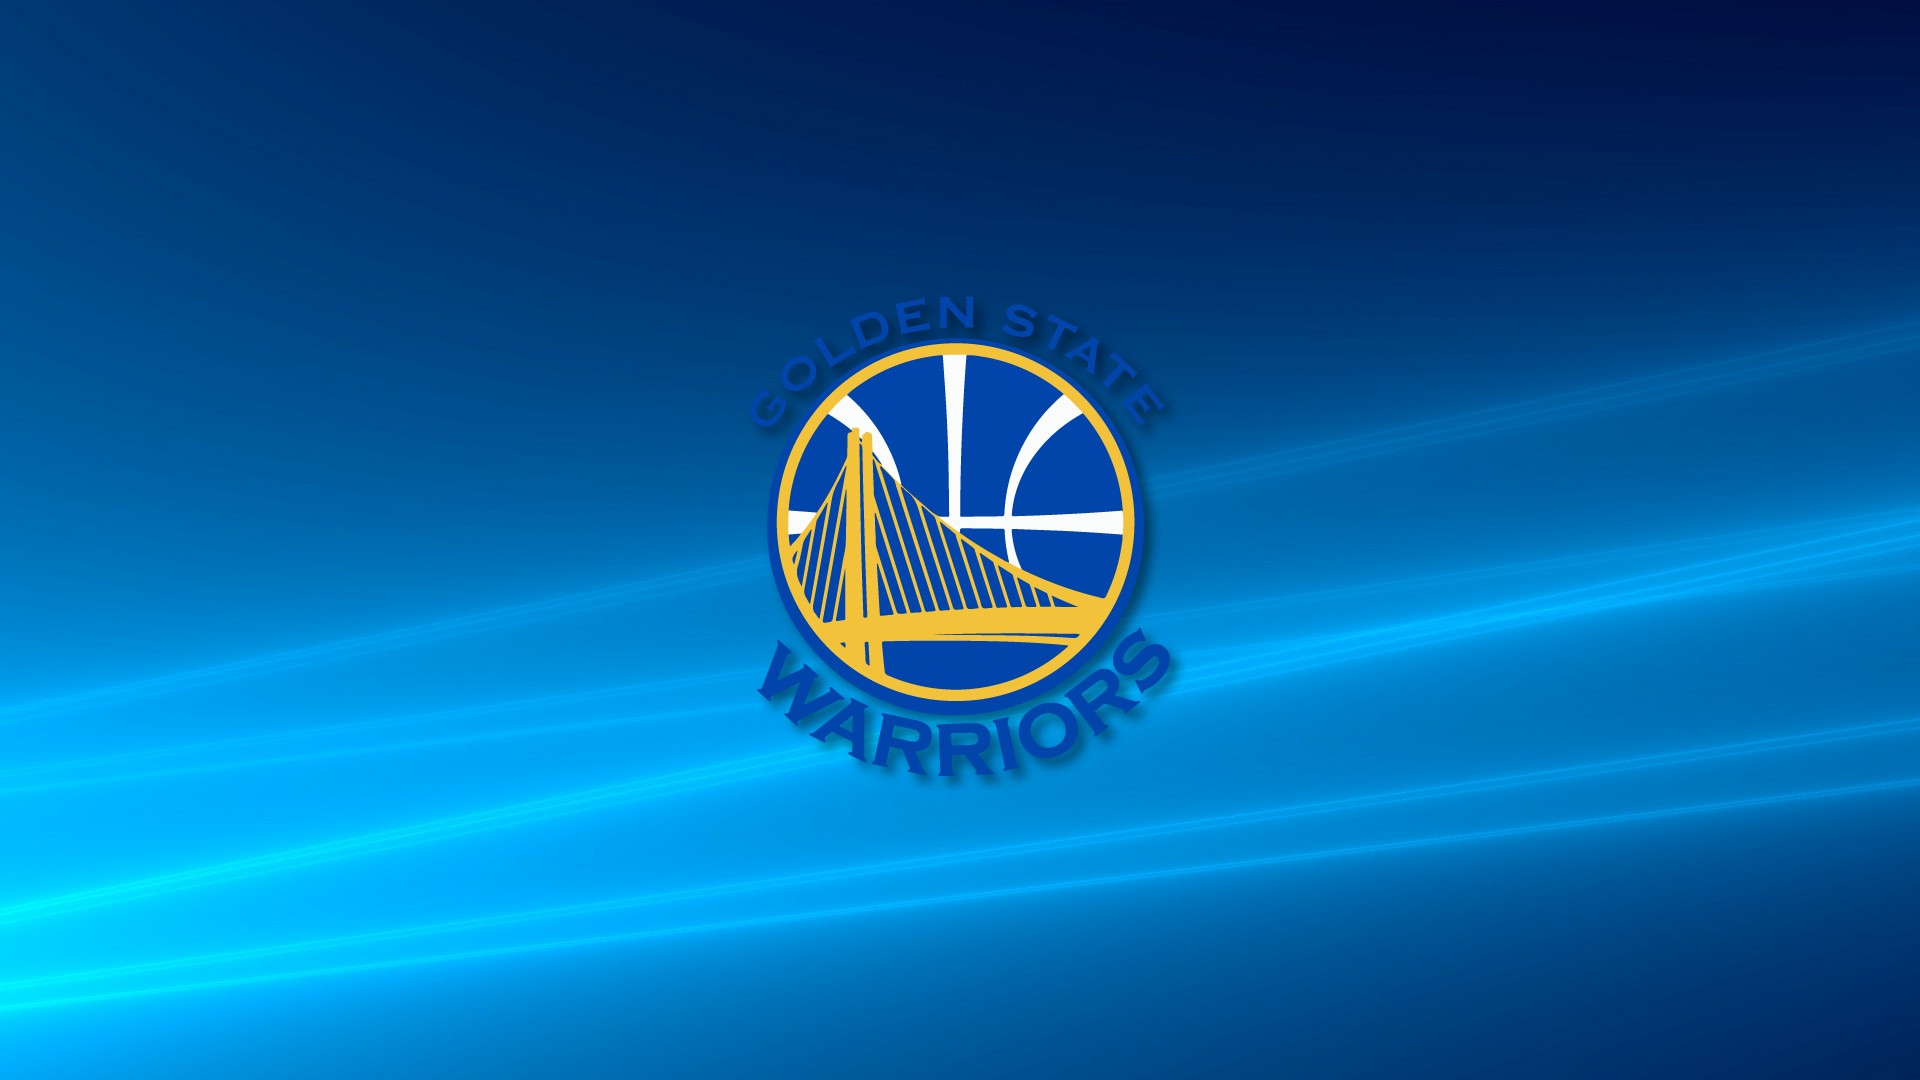 Golden State Basketball Wallpaper with high-resolution 1920x1080 pixel. You can use this wallpaper for your Desktop Computer Backgrounds, Windows or Mac Screensavers, iPhone Lock screen, Tablet or Android and another Mobile Phone device